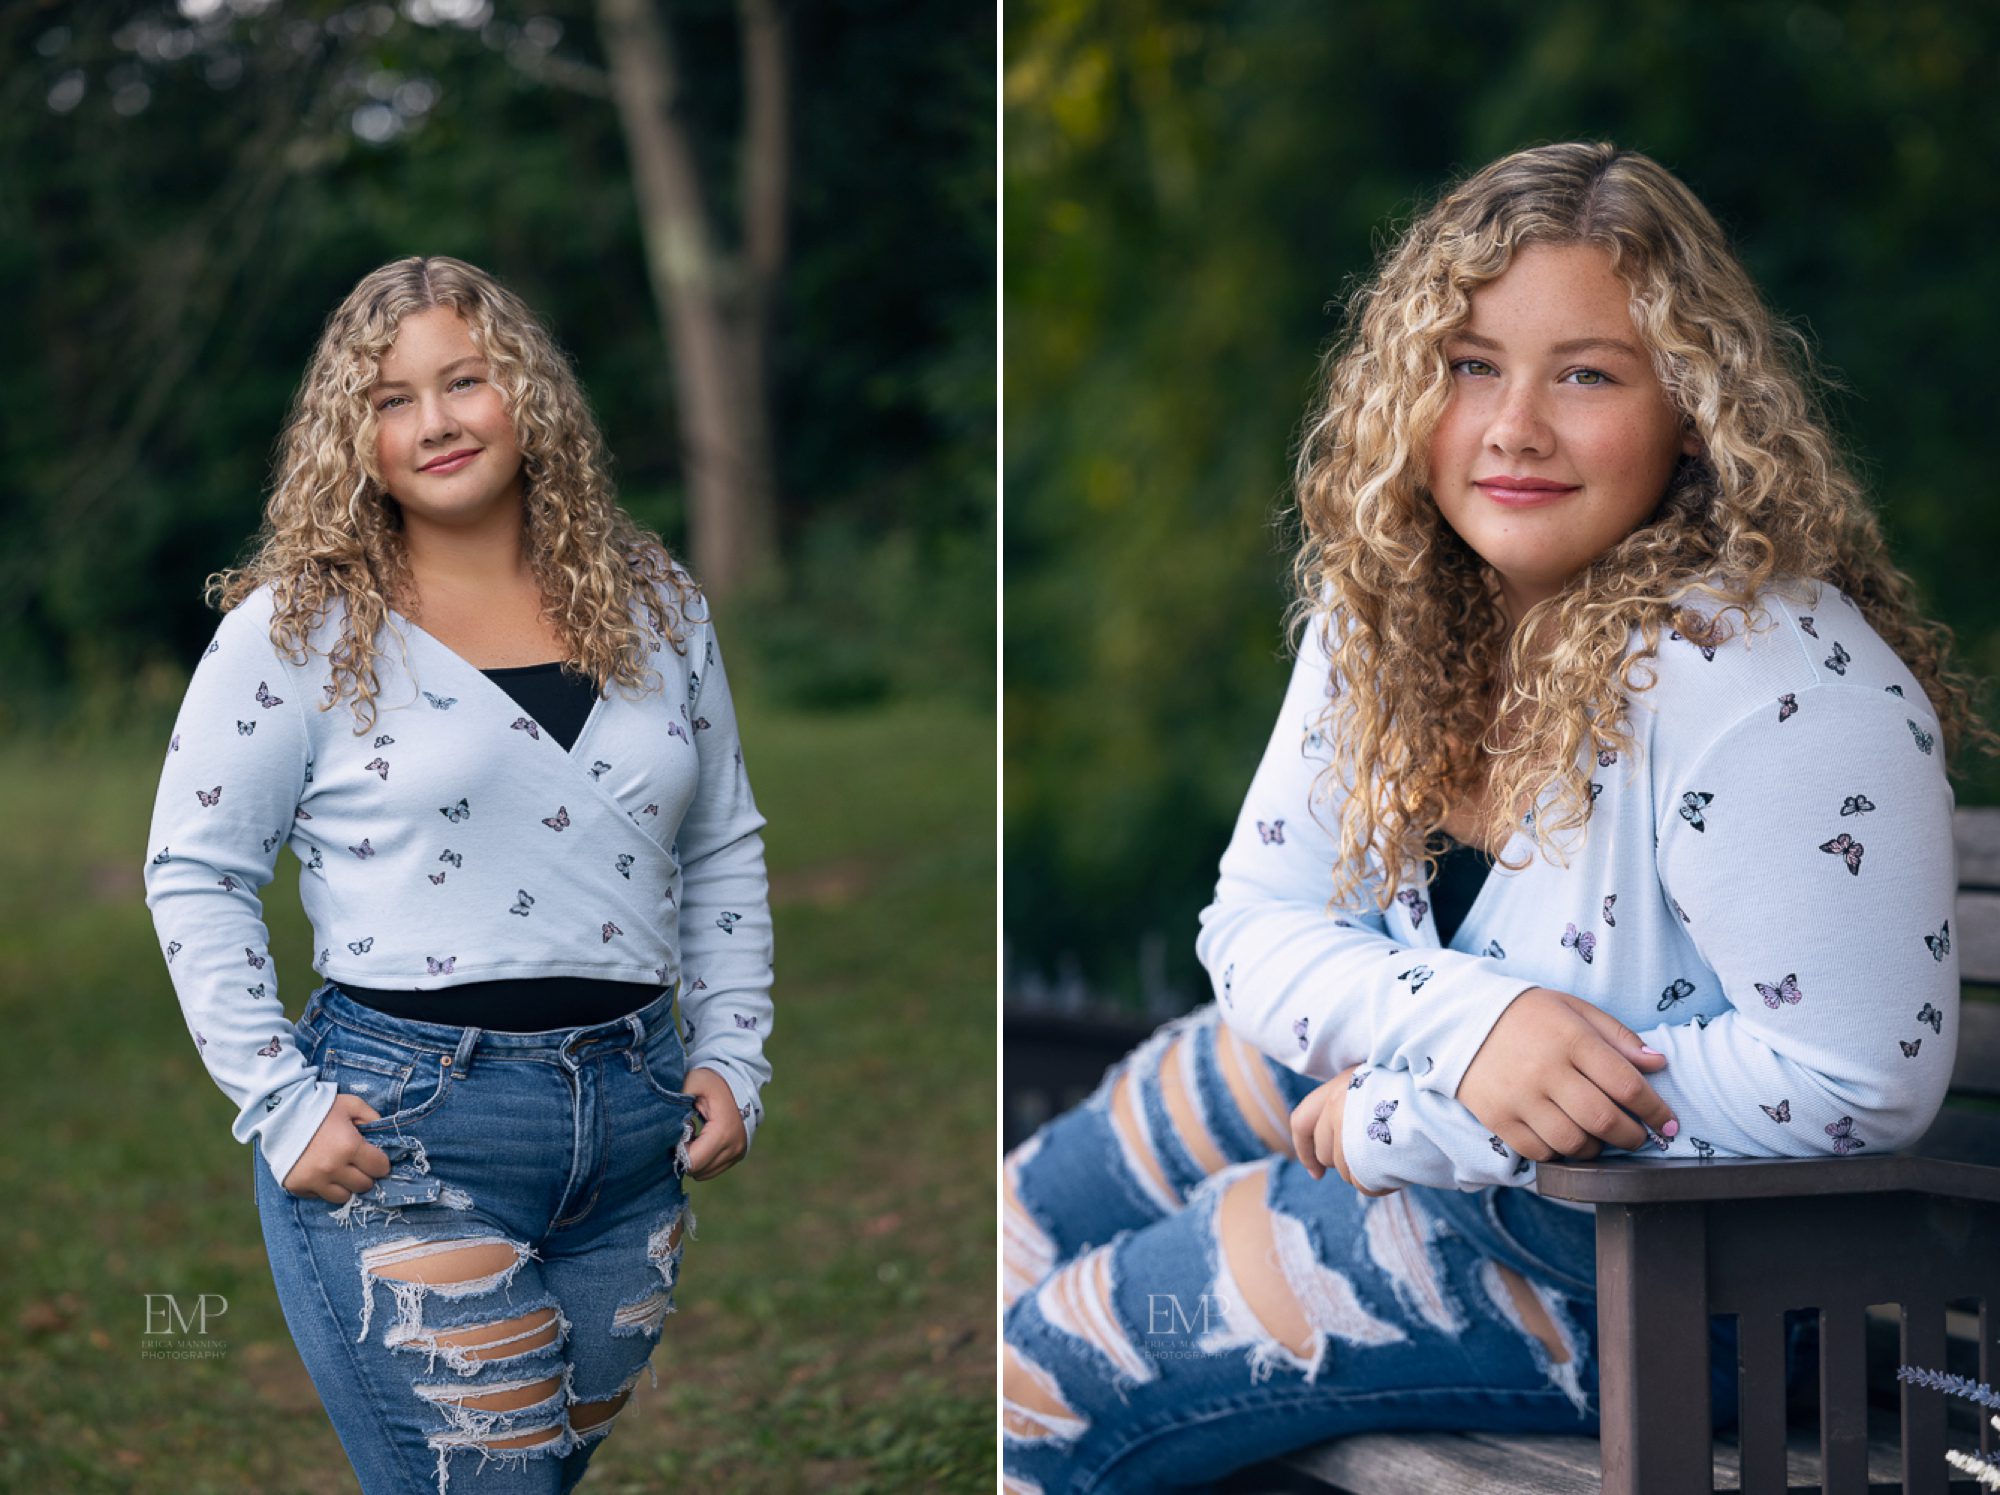 High school senior girl with curly hair in casual blue outfit in park setting